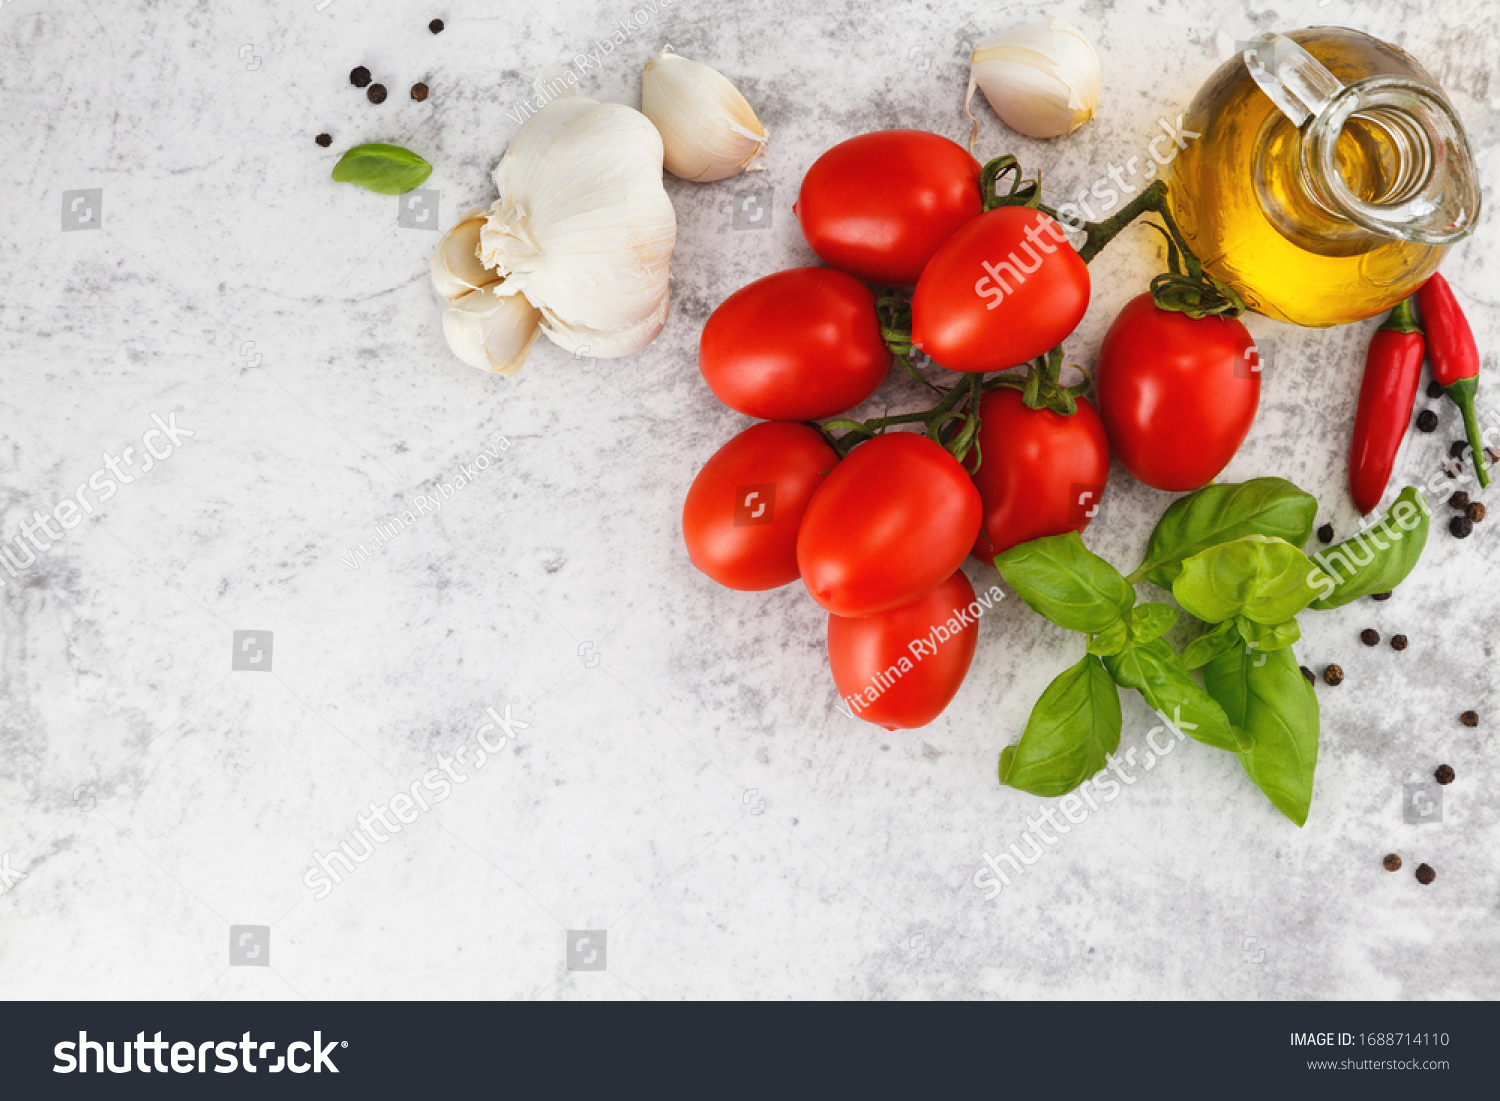 Fresh colorful tomatoes, basil and olive oil on white table. Top view with copy space
 #1688714110